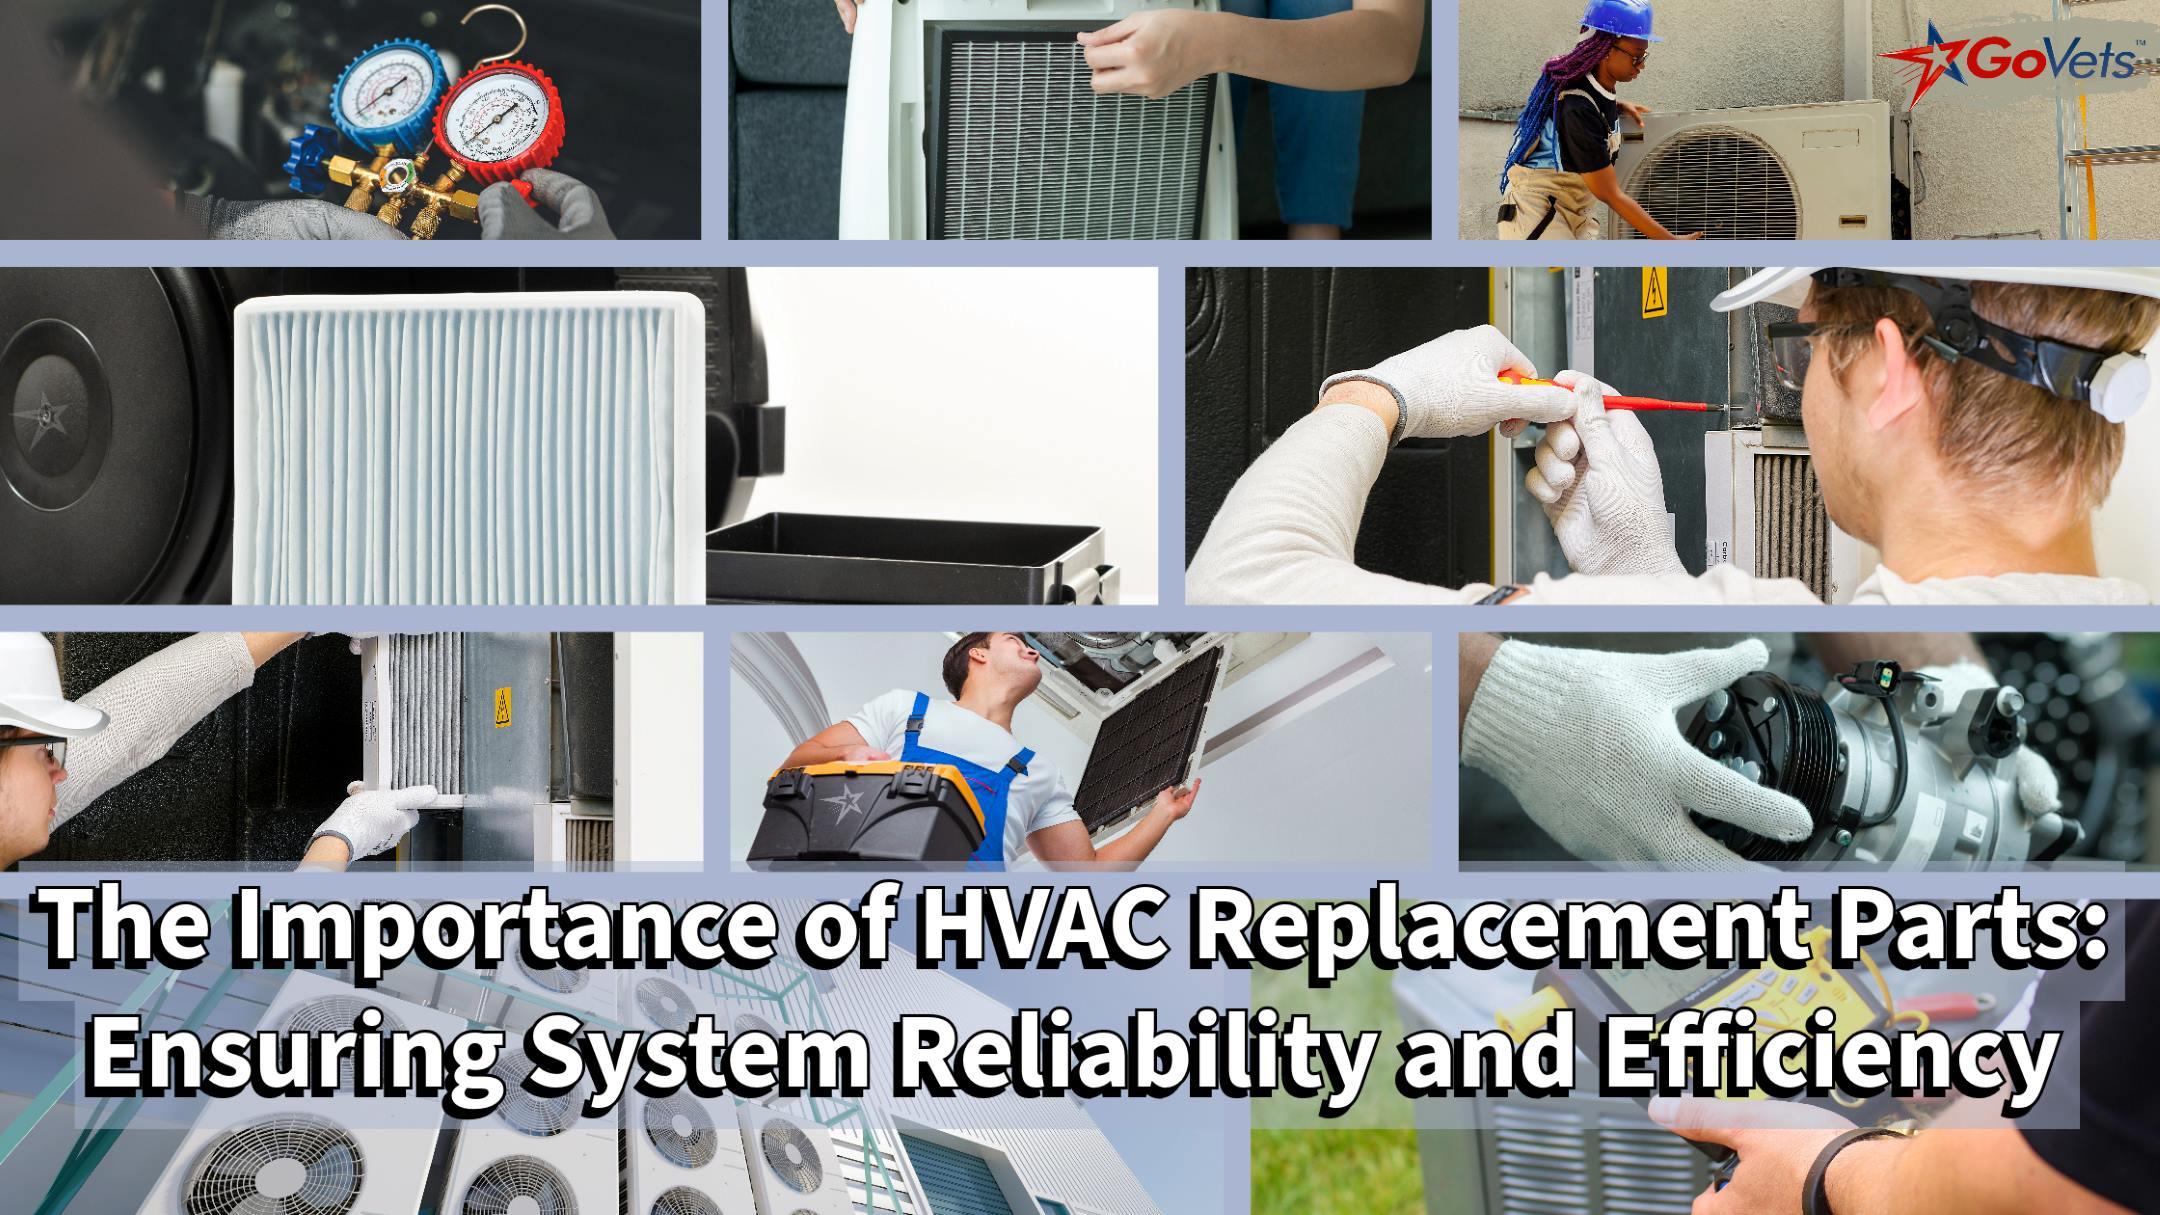 The Importance of HVAC Replacement Parts - Ensuring System Reliability and Efficiency